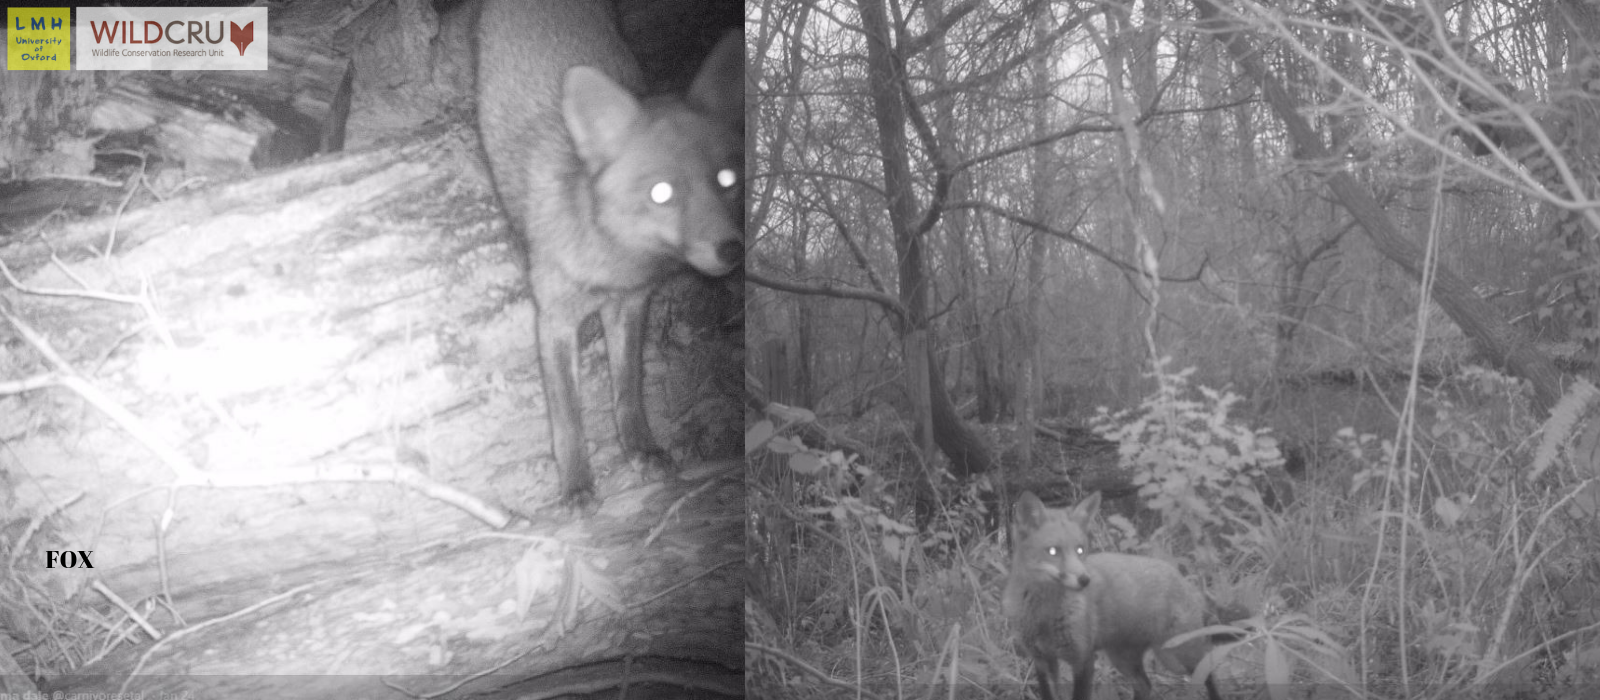 LMH fox camera trap pictures by WildCRU and Emma Dale	